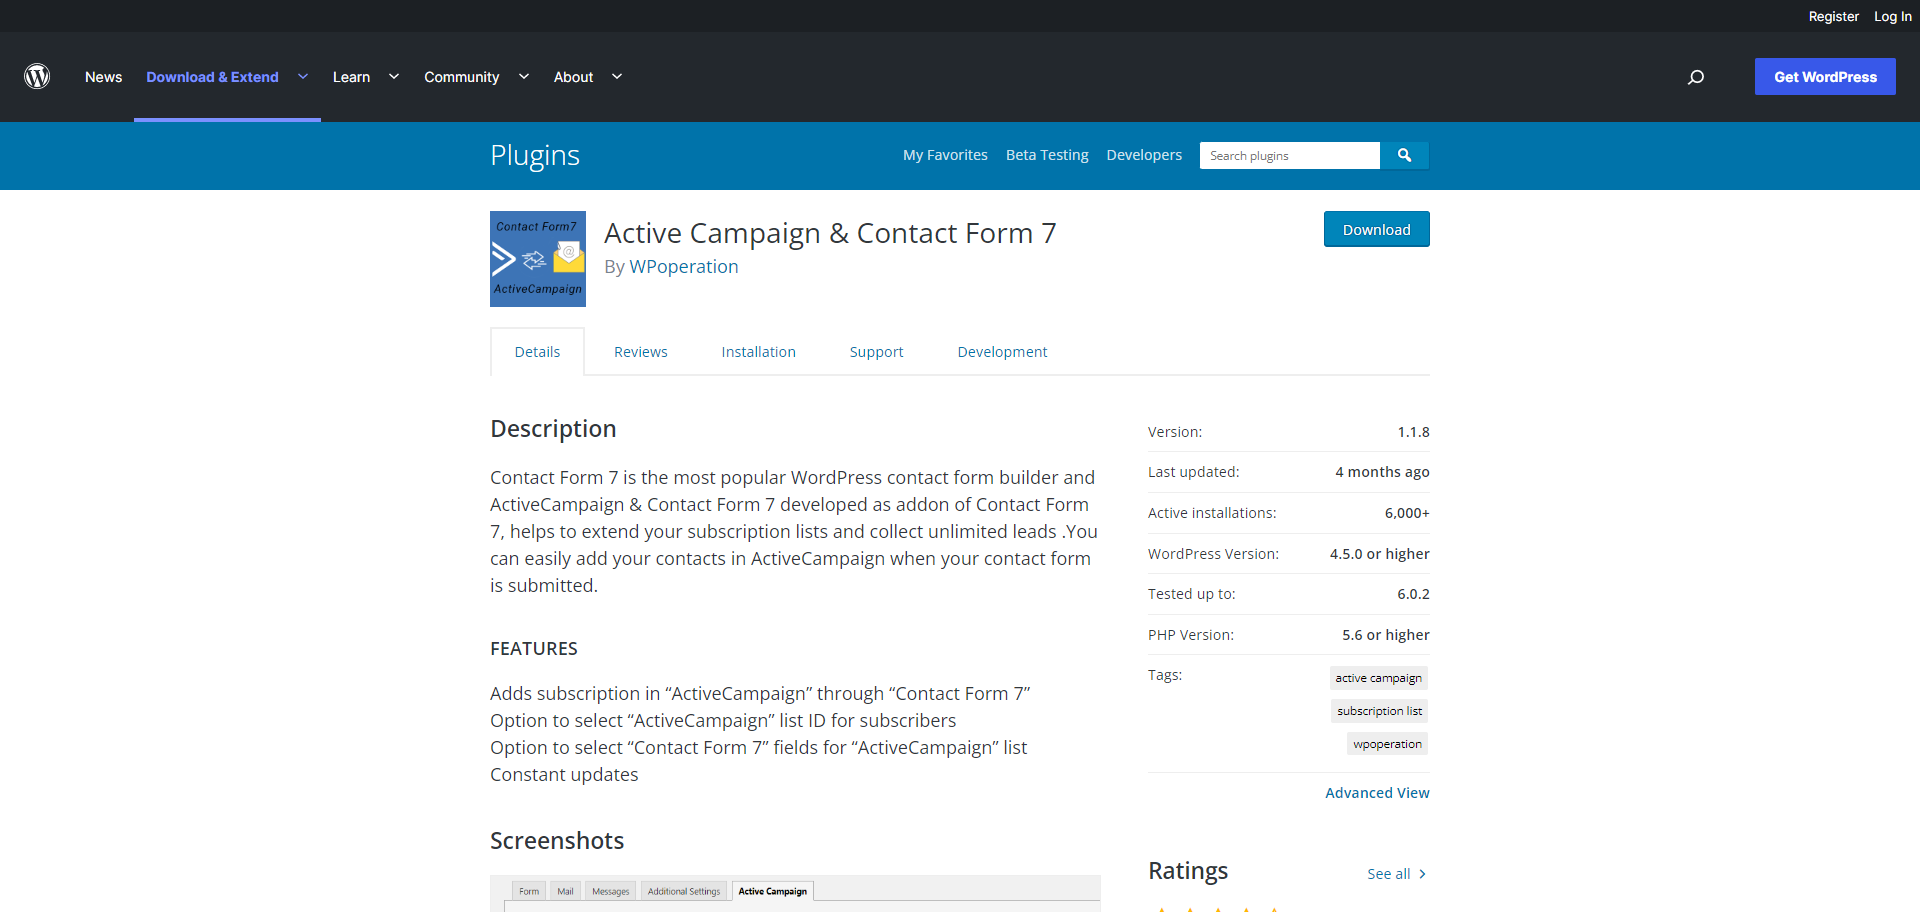 Active Campaign & Contact Form 7